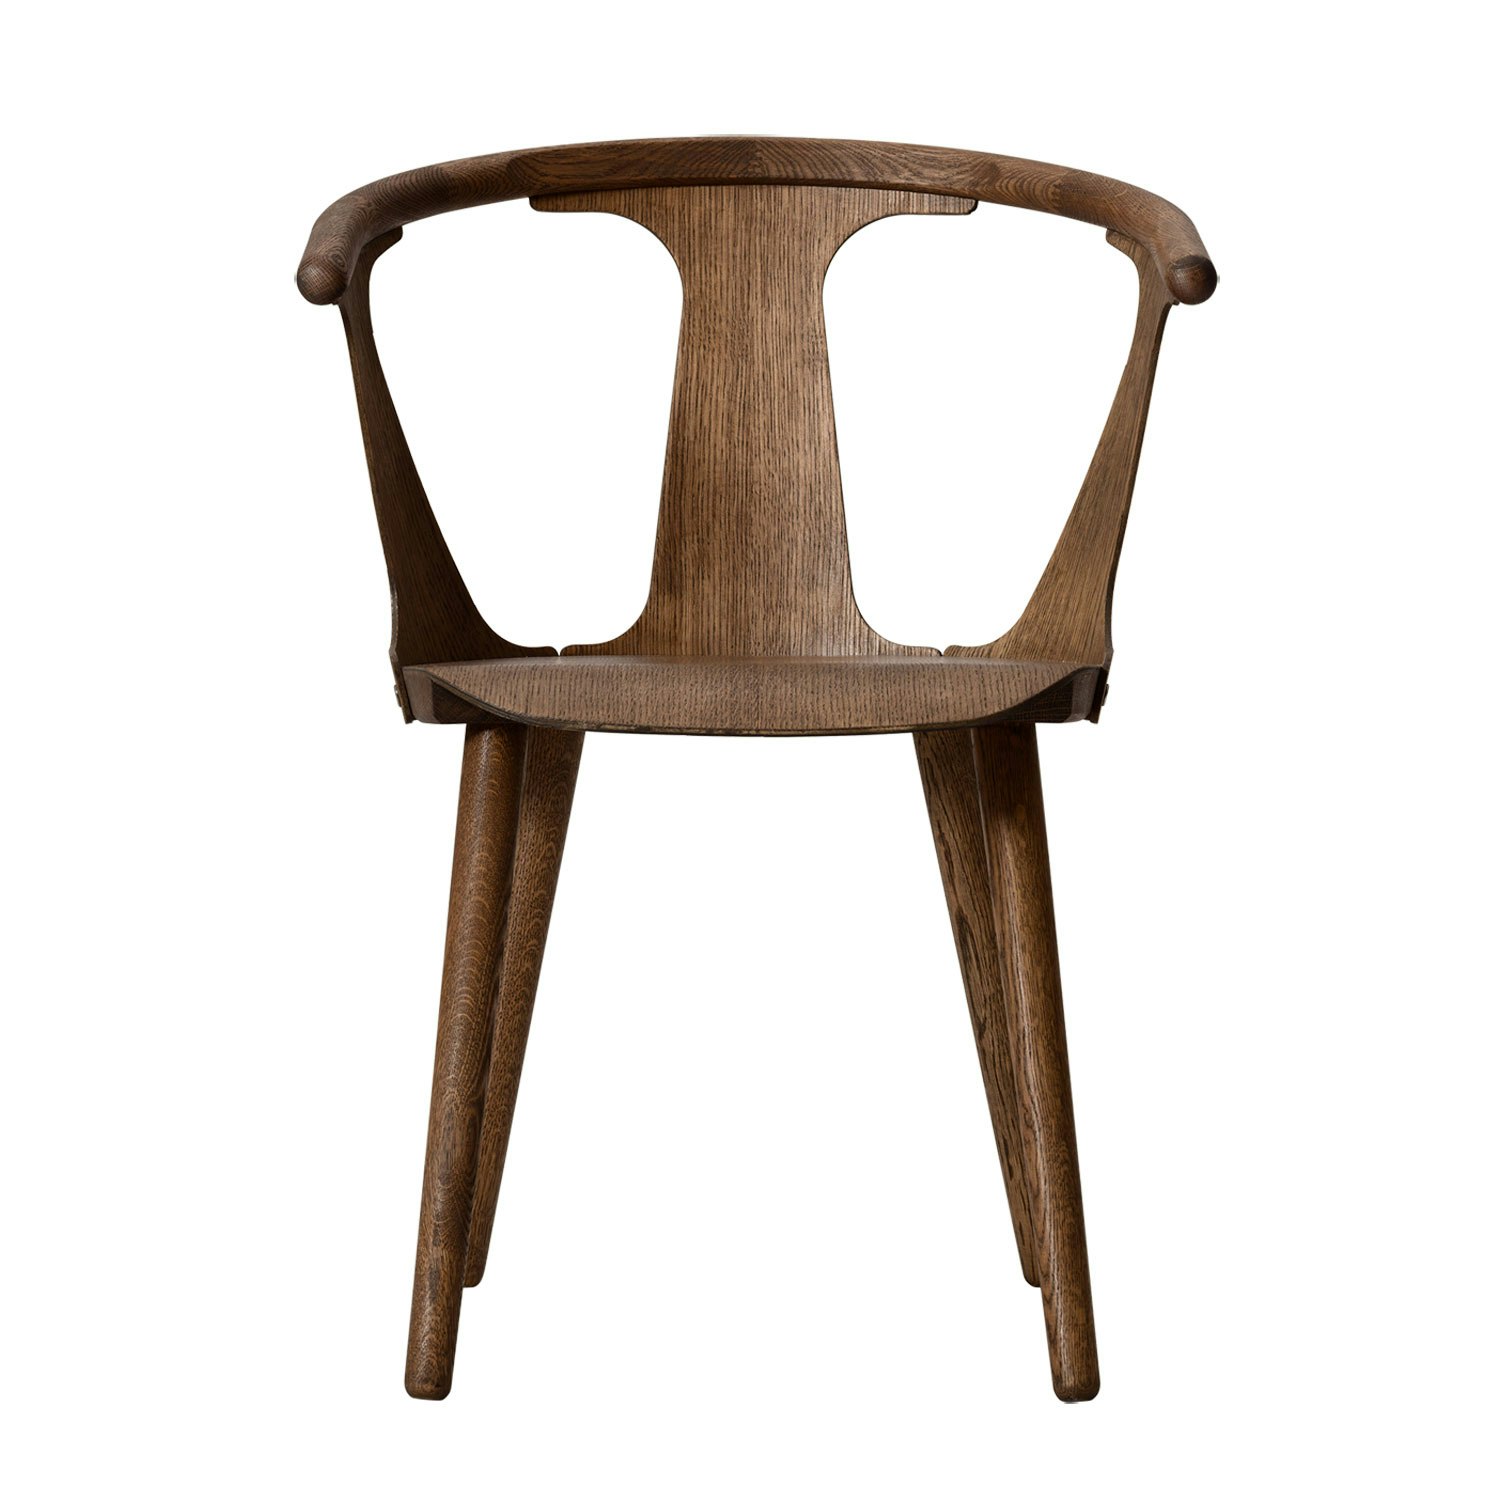 andTradition In Between SK2 Dining Chair - Seat Upholstered by Sami Kallio